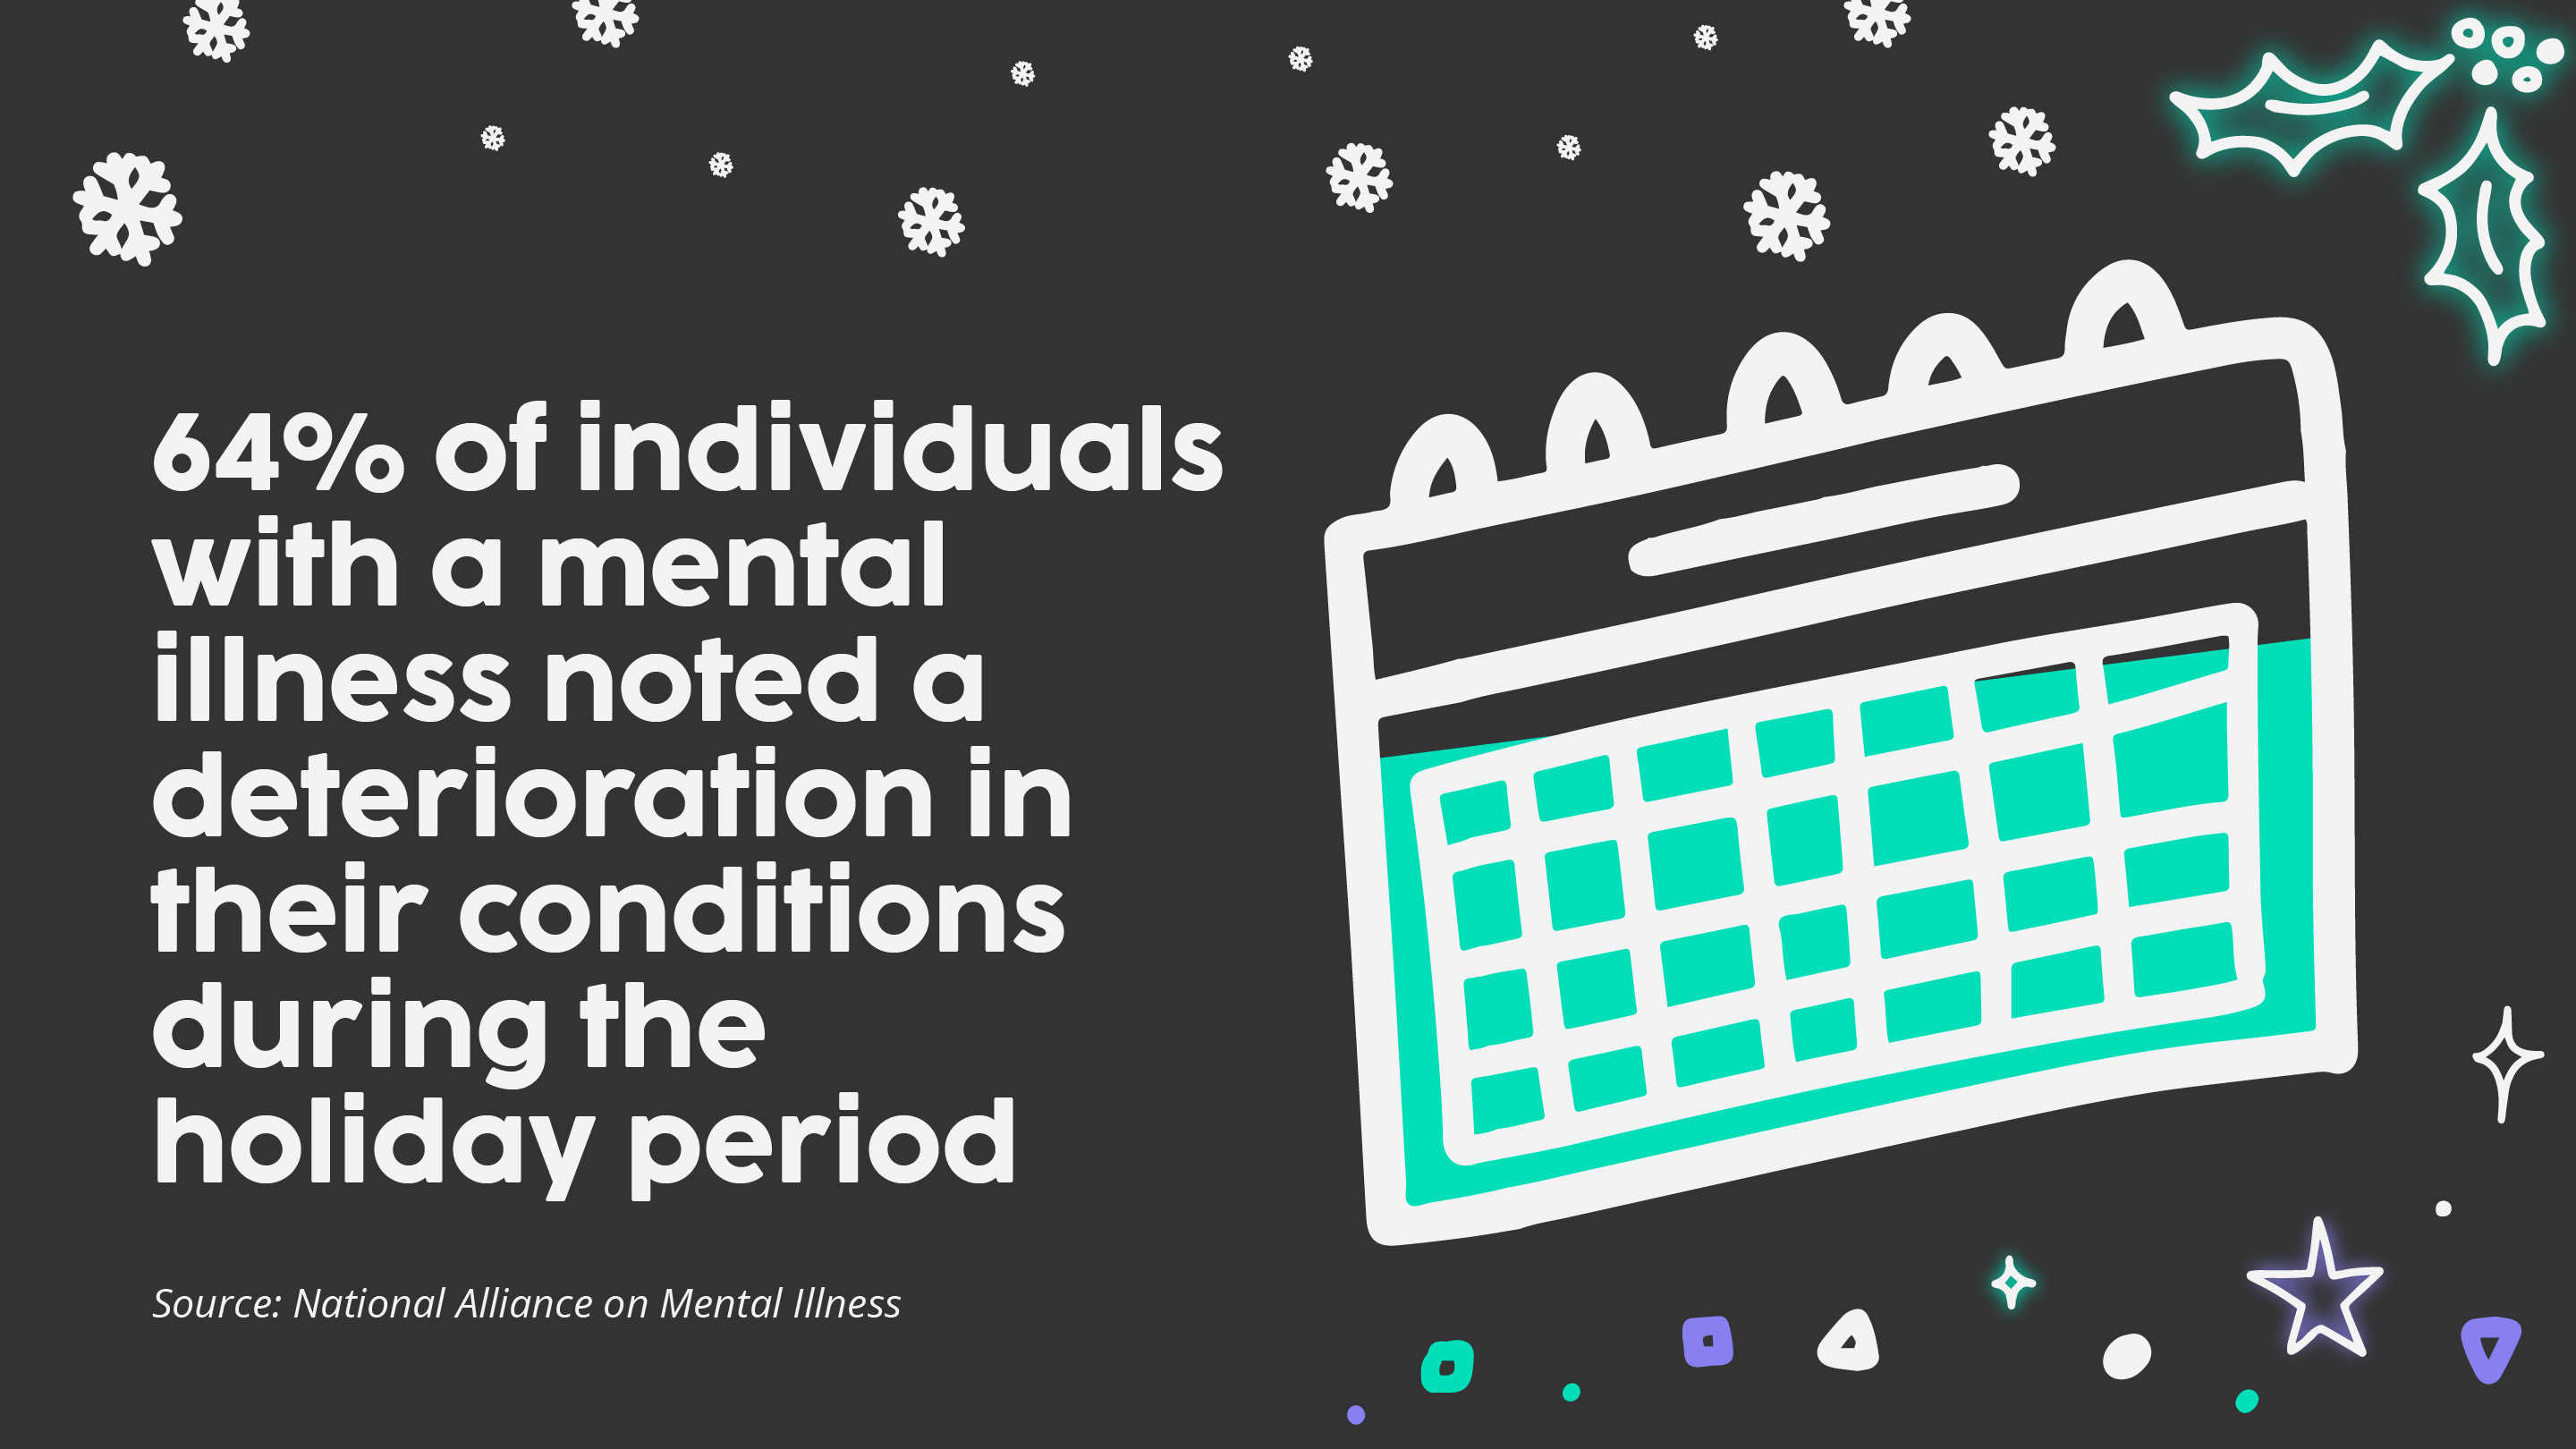 64% of individuals with a mental illness noted a deterioration in their conditions during the holiday period Source: National Alliance on Mental Illness